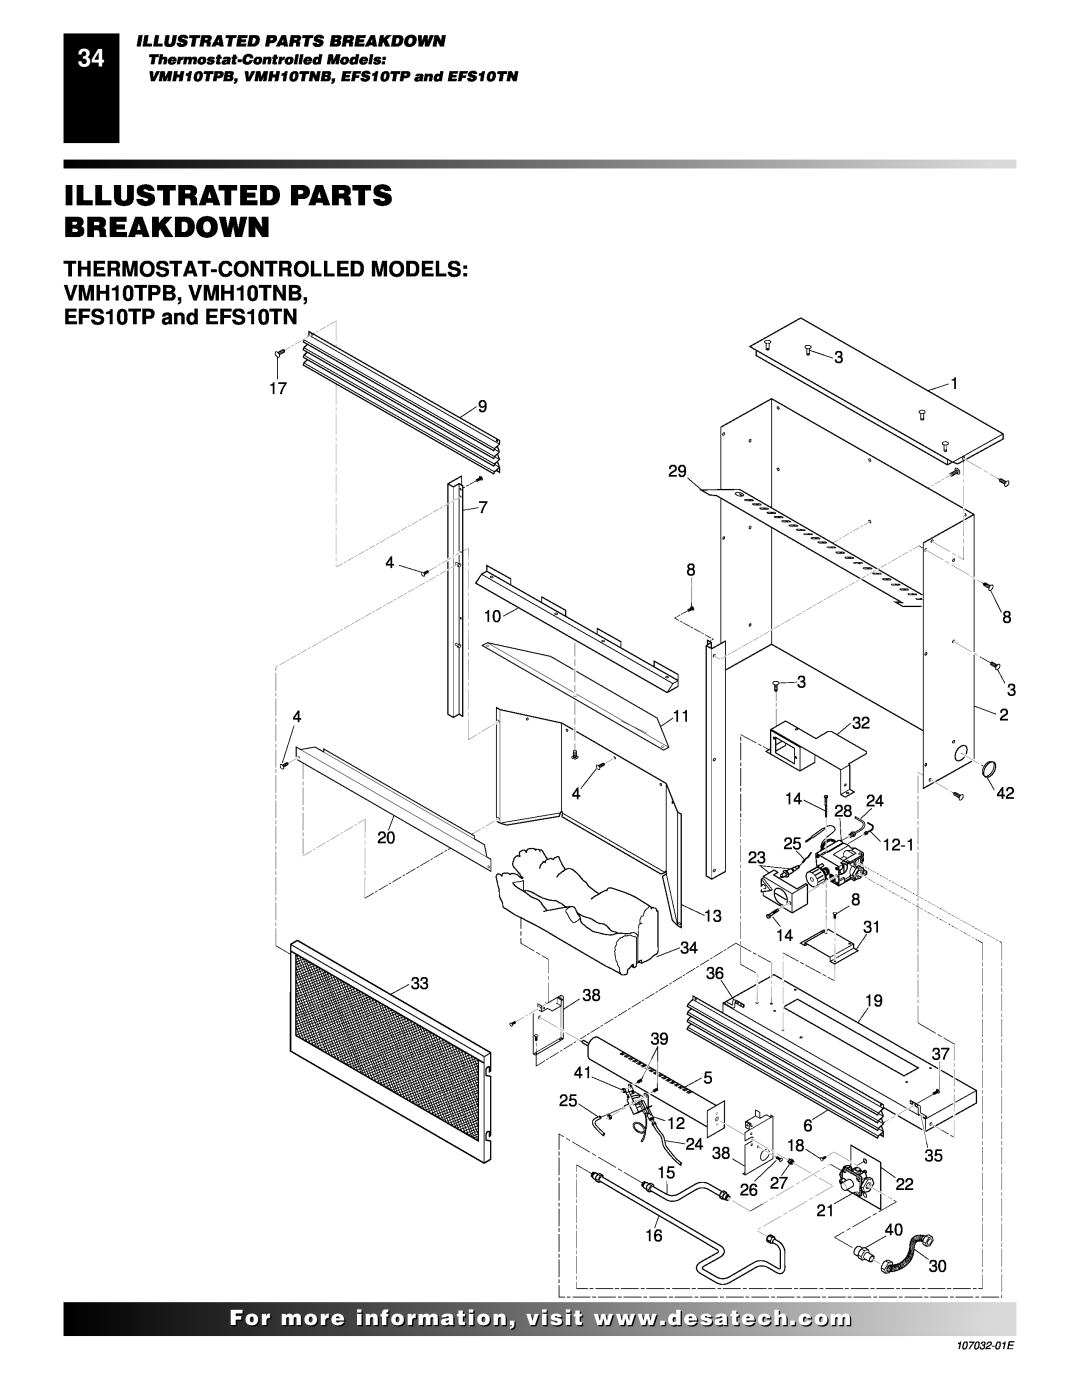 Desa Illustrated Parts Breakdown, THERMOSTAT-CONTROLLEDMODELS VMH10TPB, VMH10TNB, EFS10TP and EFS10TN, For..com 